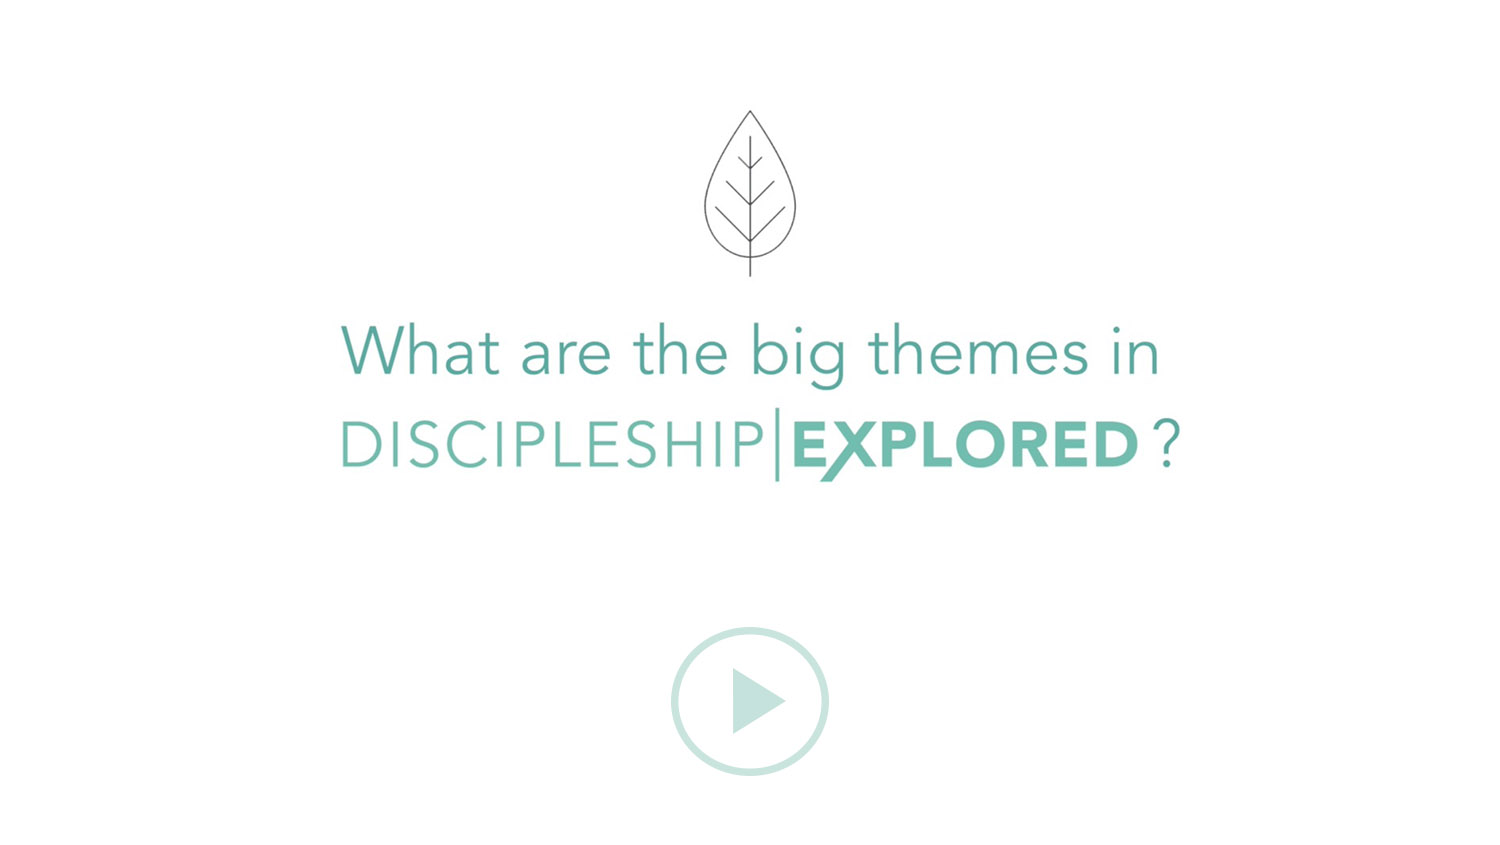 Question 6*What are the big themes in Discipleship Explored?